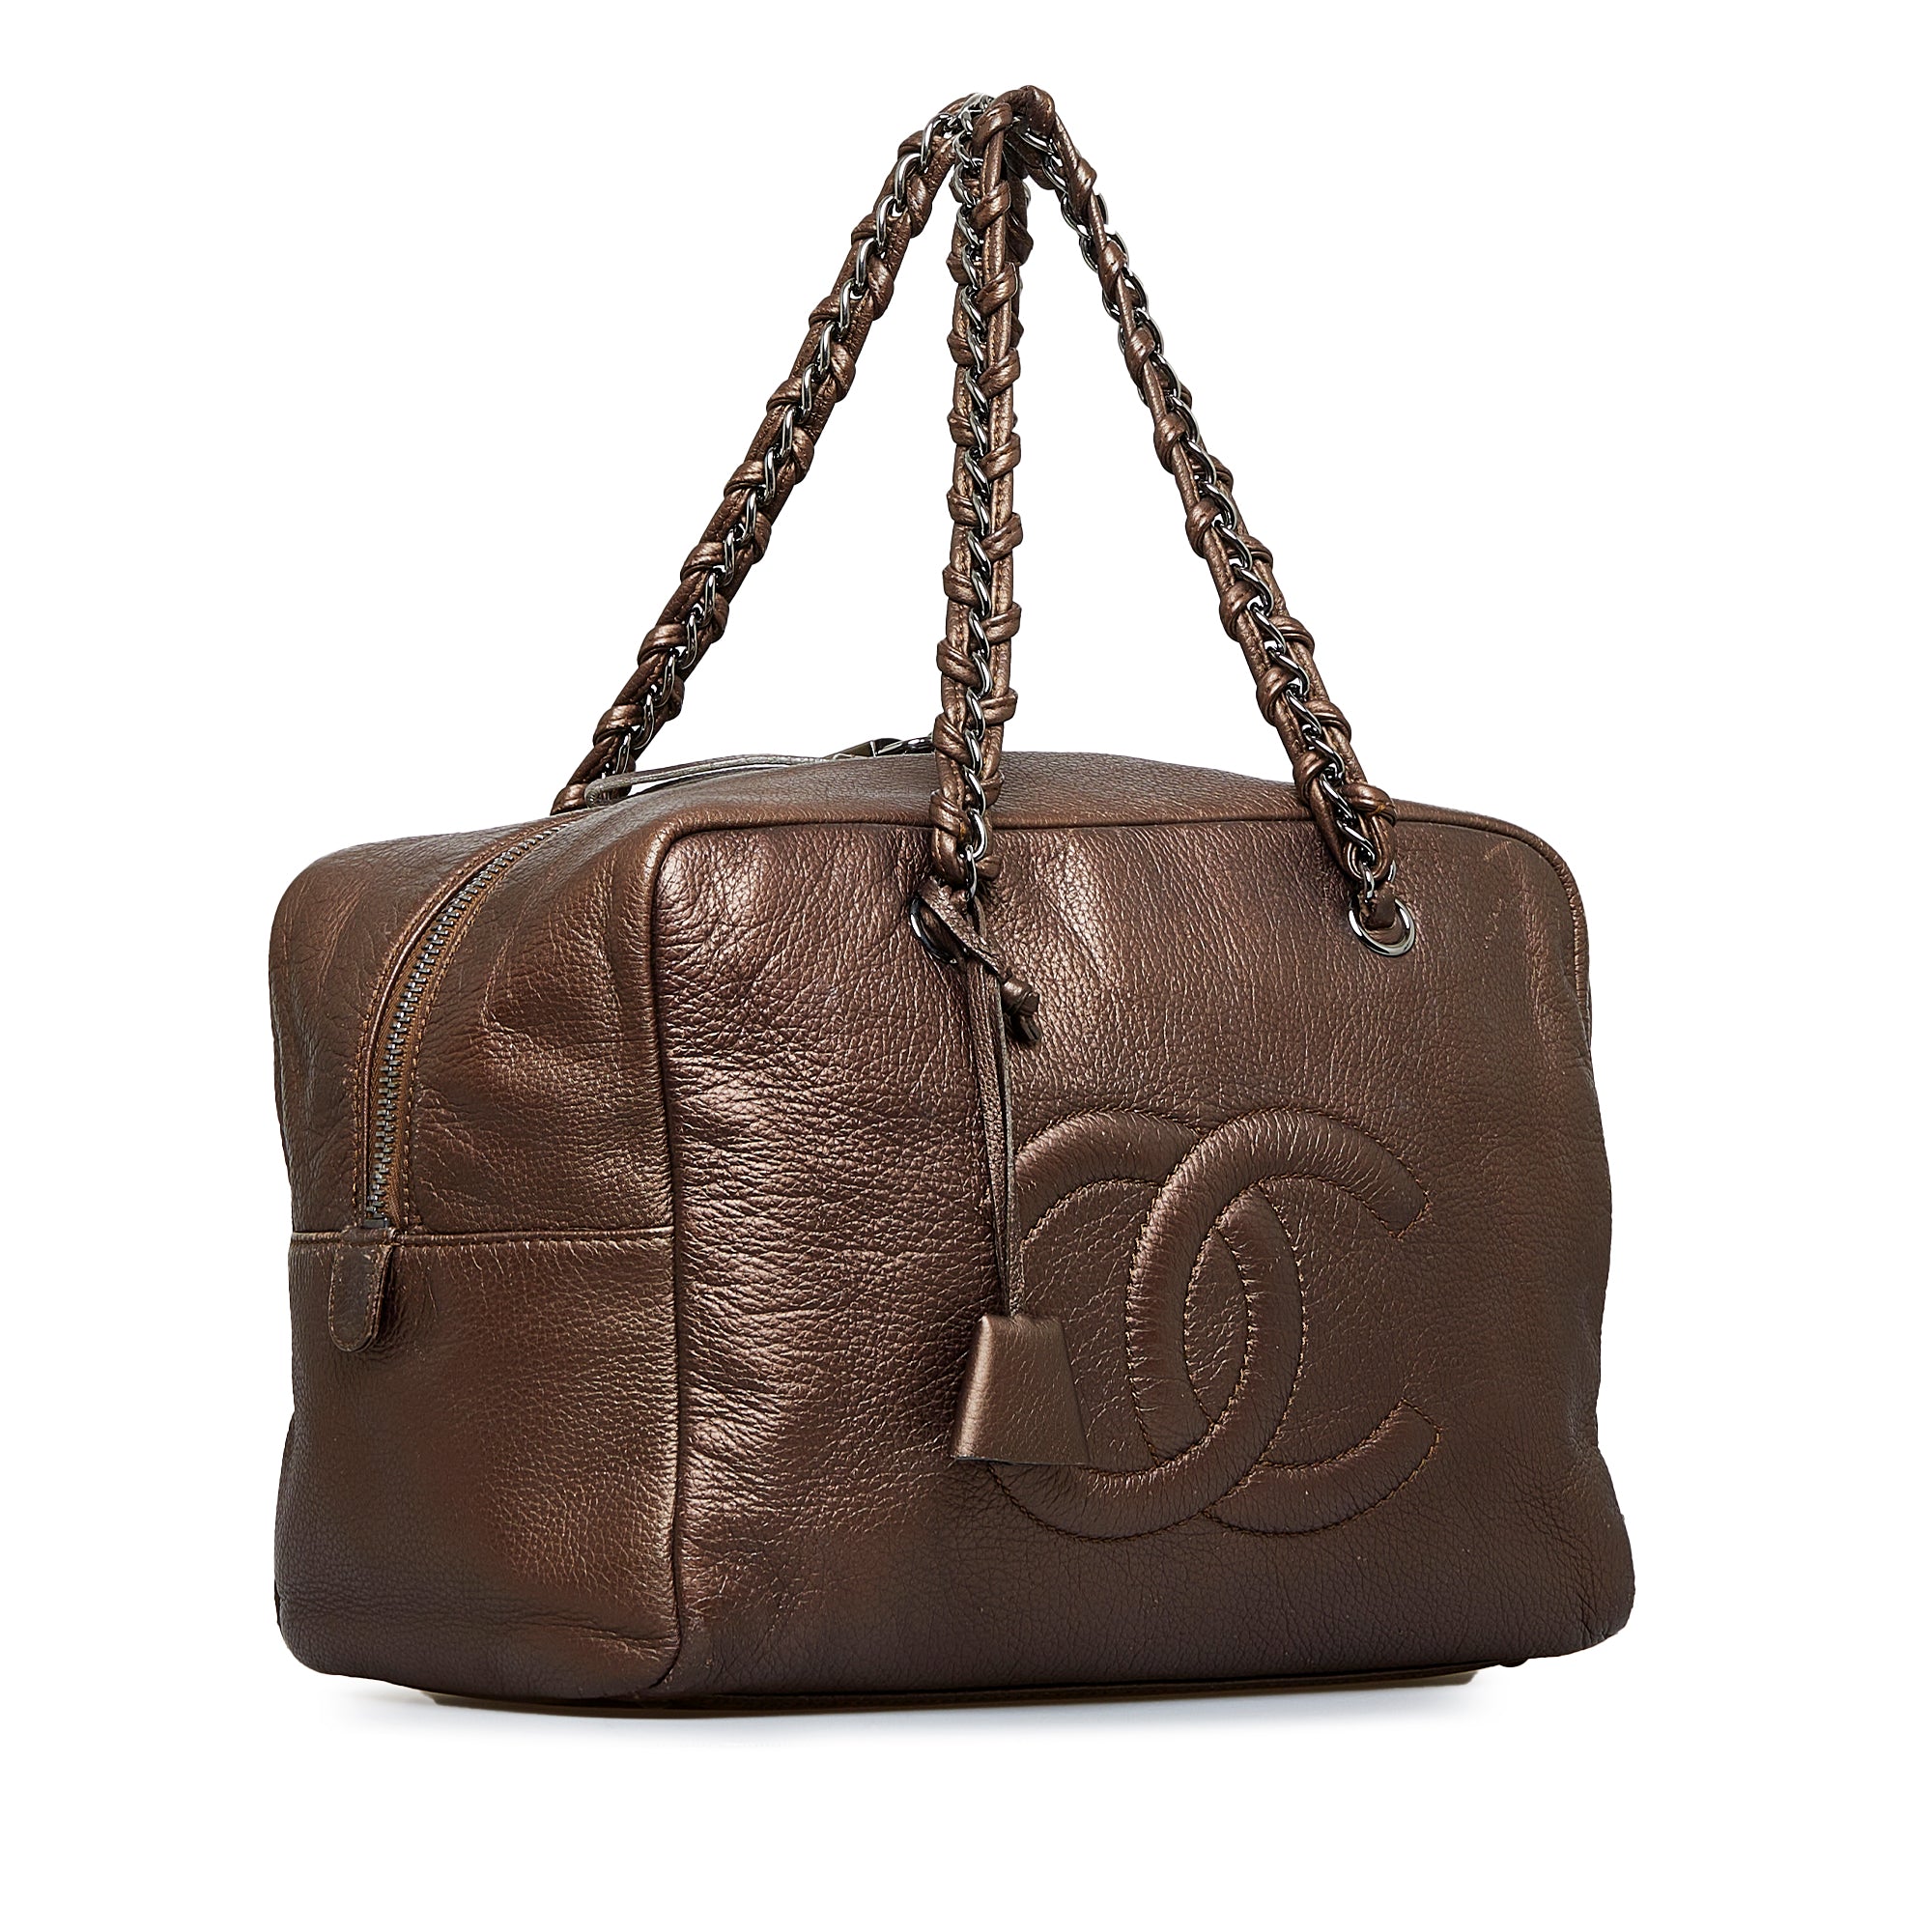 Chanel Calfskin Luxe Ligne Tote in Metallic Brown